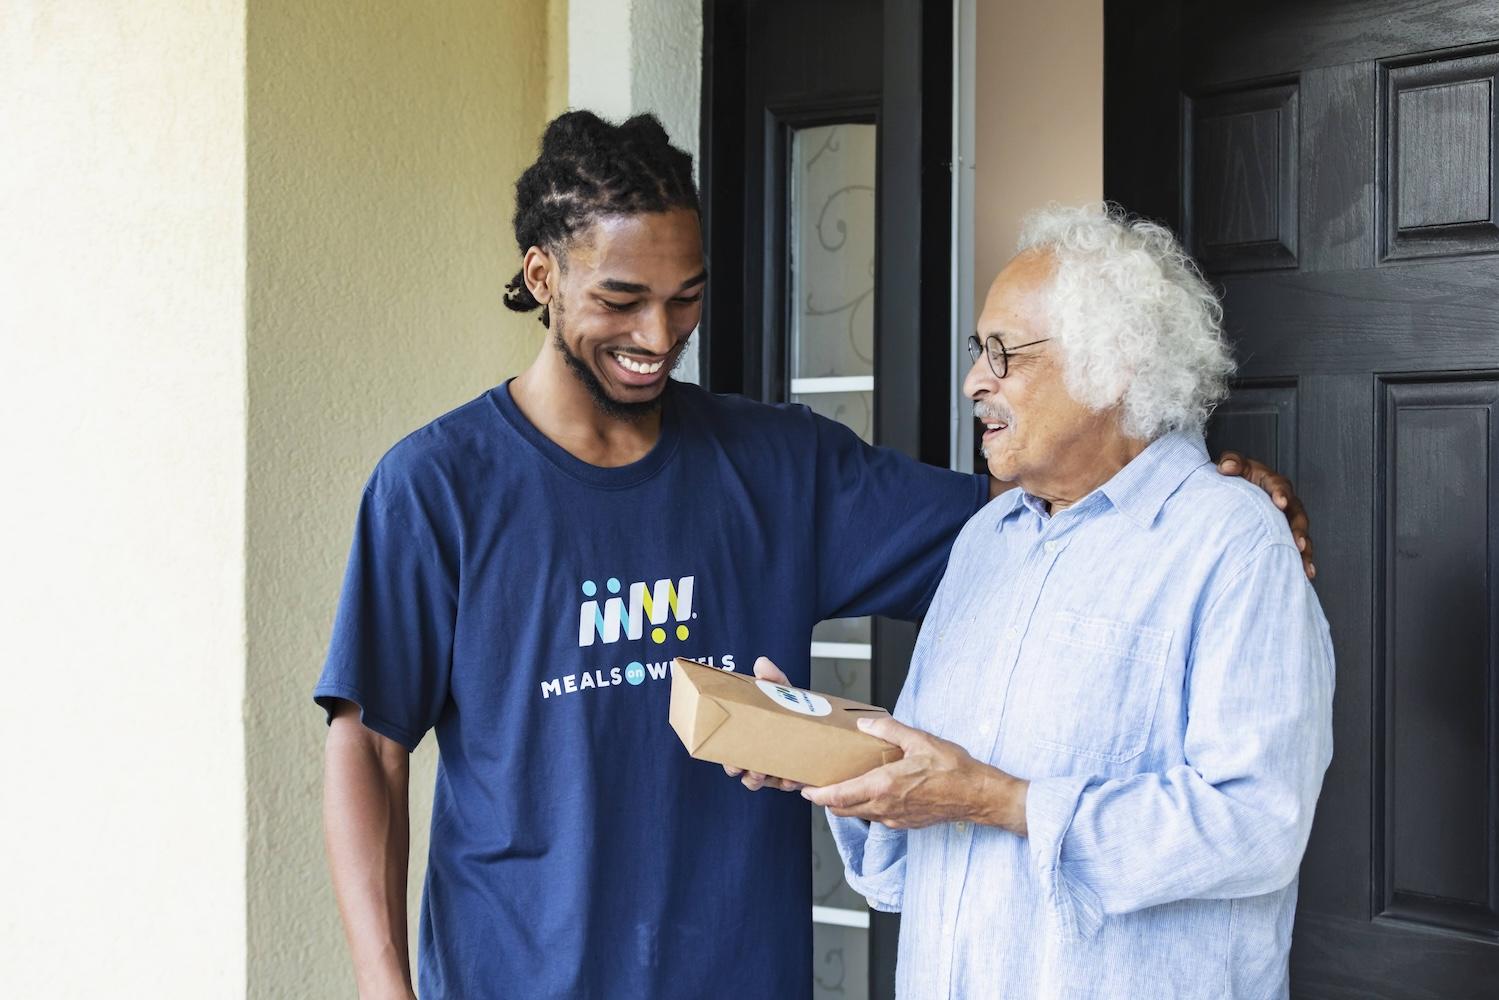 meals on wheels volunteer hands meal to a senior